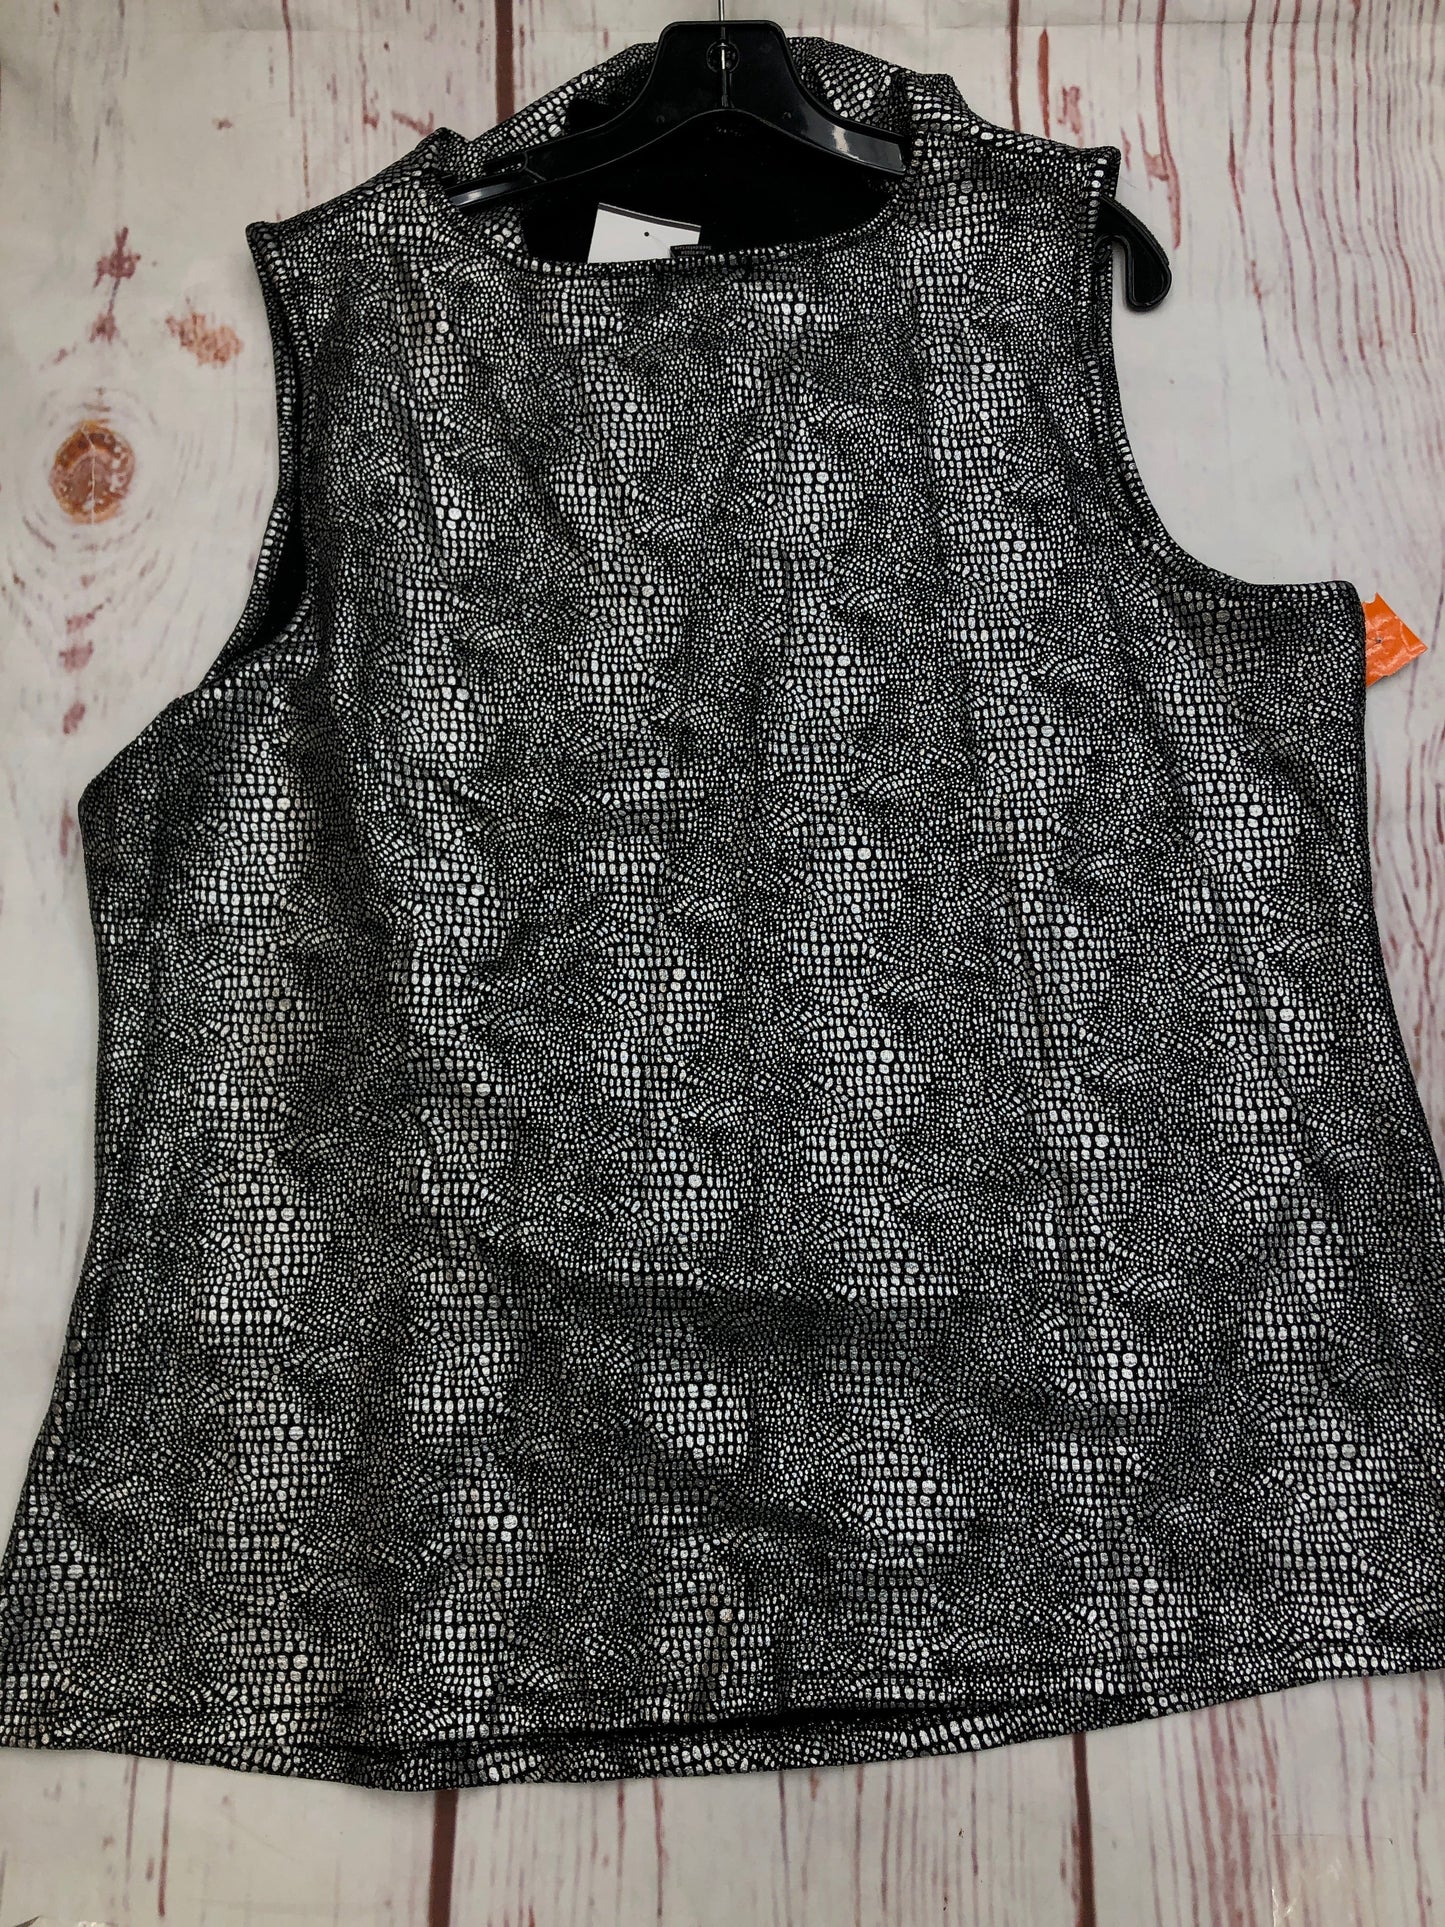 Top Sleeveless By By Design  Size: 1x